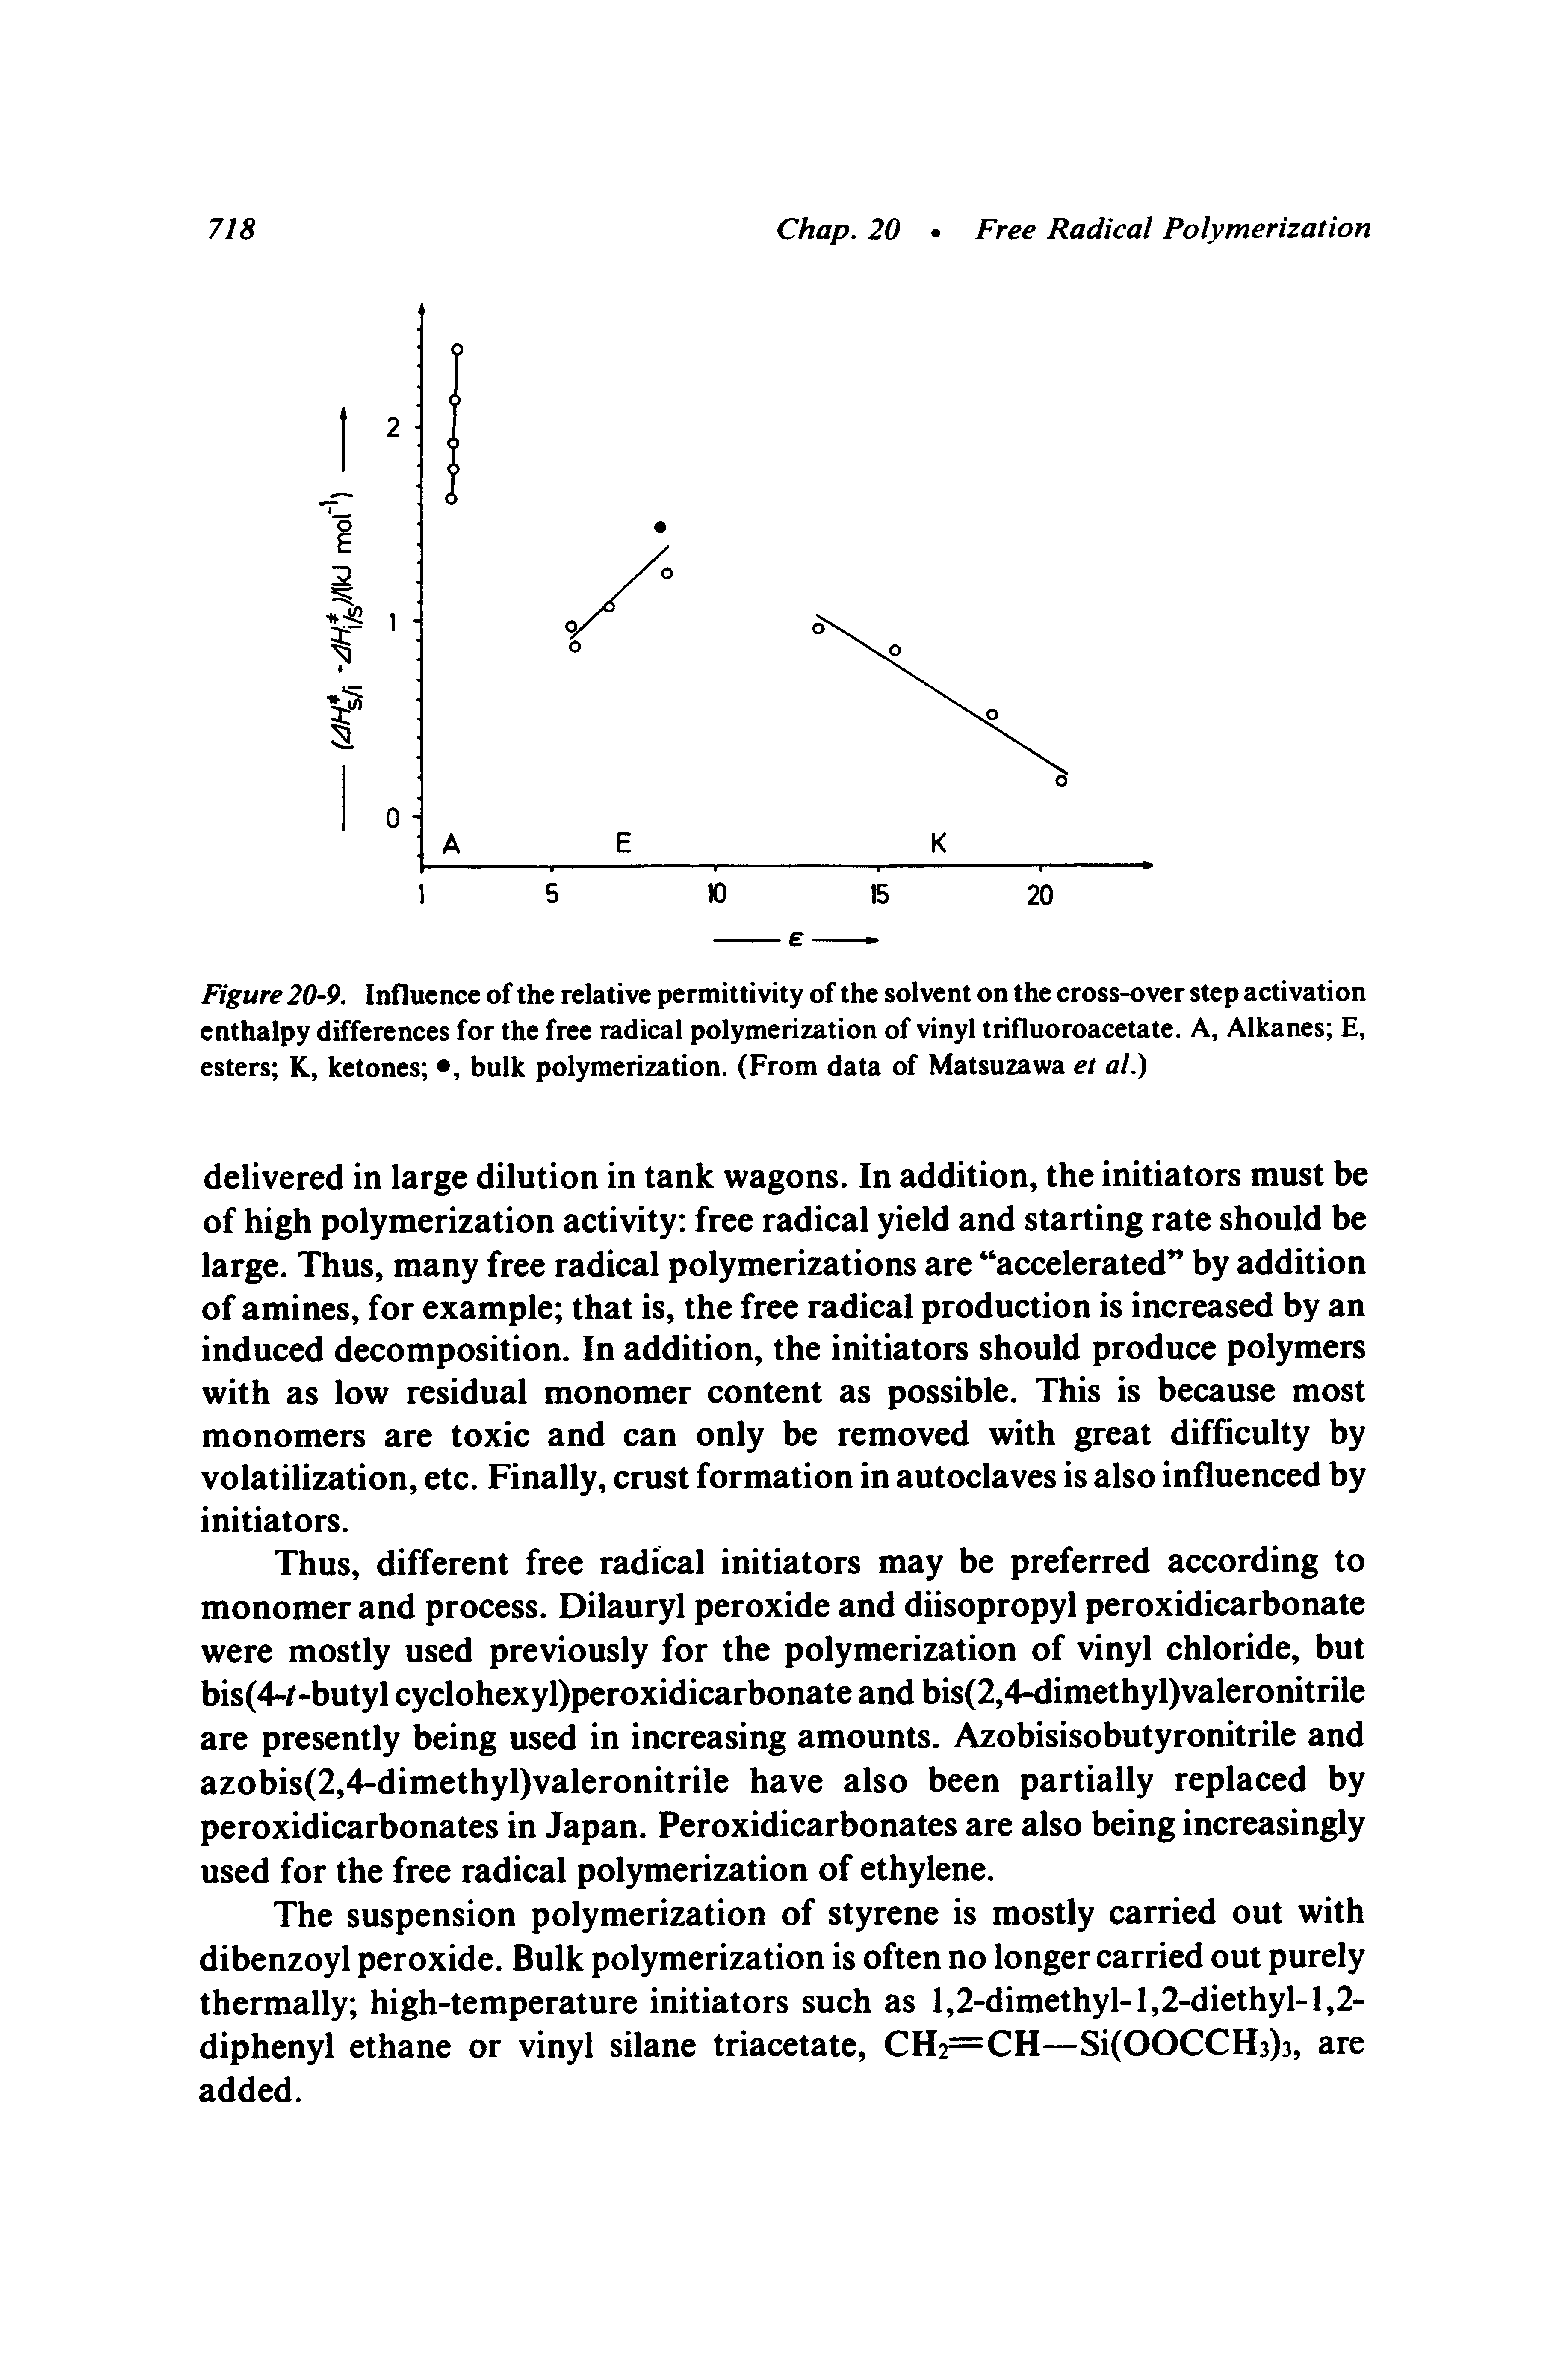 Figure 20-9. Influence of the relative permittivity of the solvent on the cross-over step activation enthalpy differences for the free radical polymerization of vinyl trifluoroacetate. A, Alkanes E, esters K, ketones , bulk polymerization. (From data of Matsuzawa et al.)...